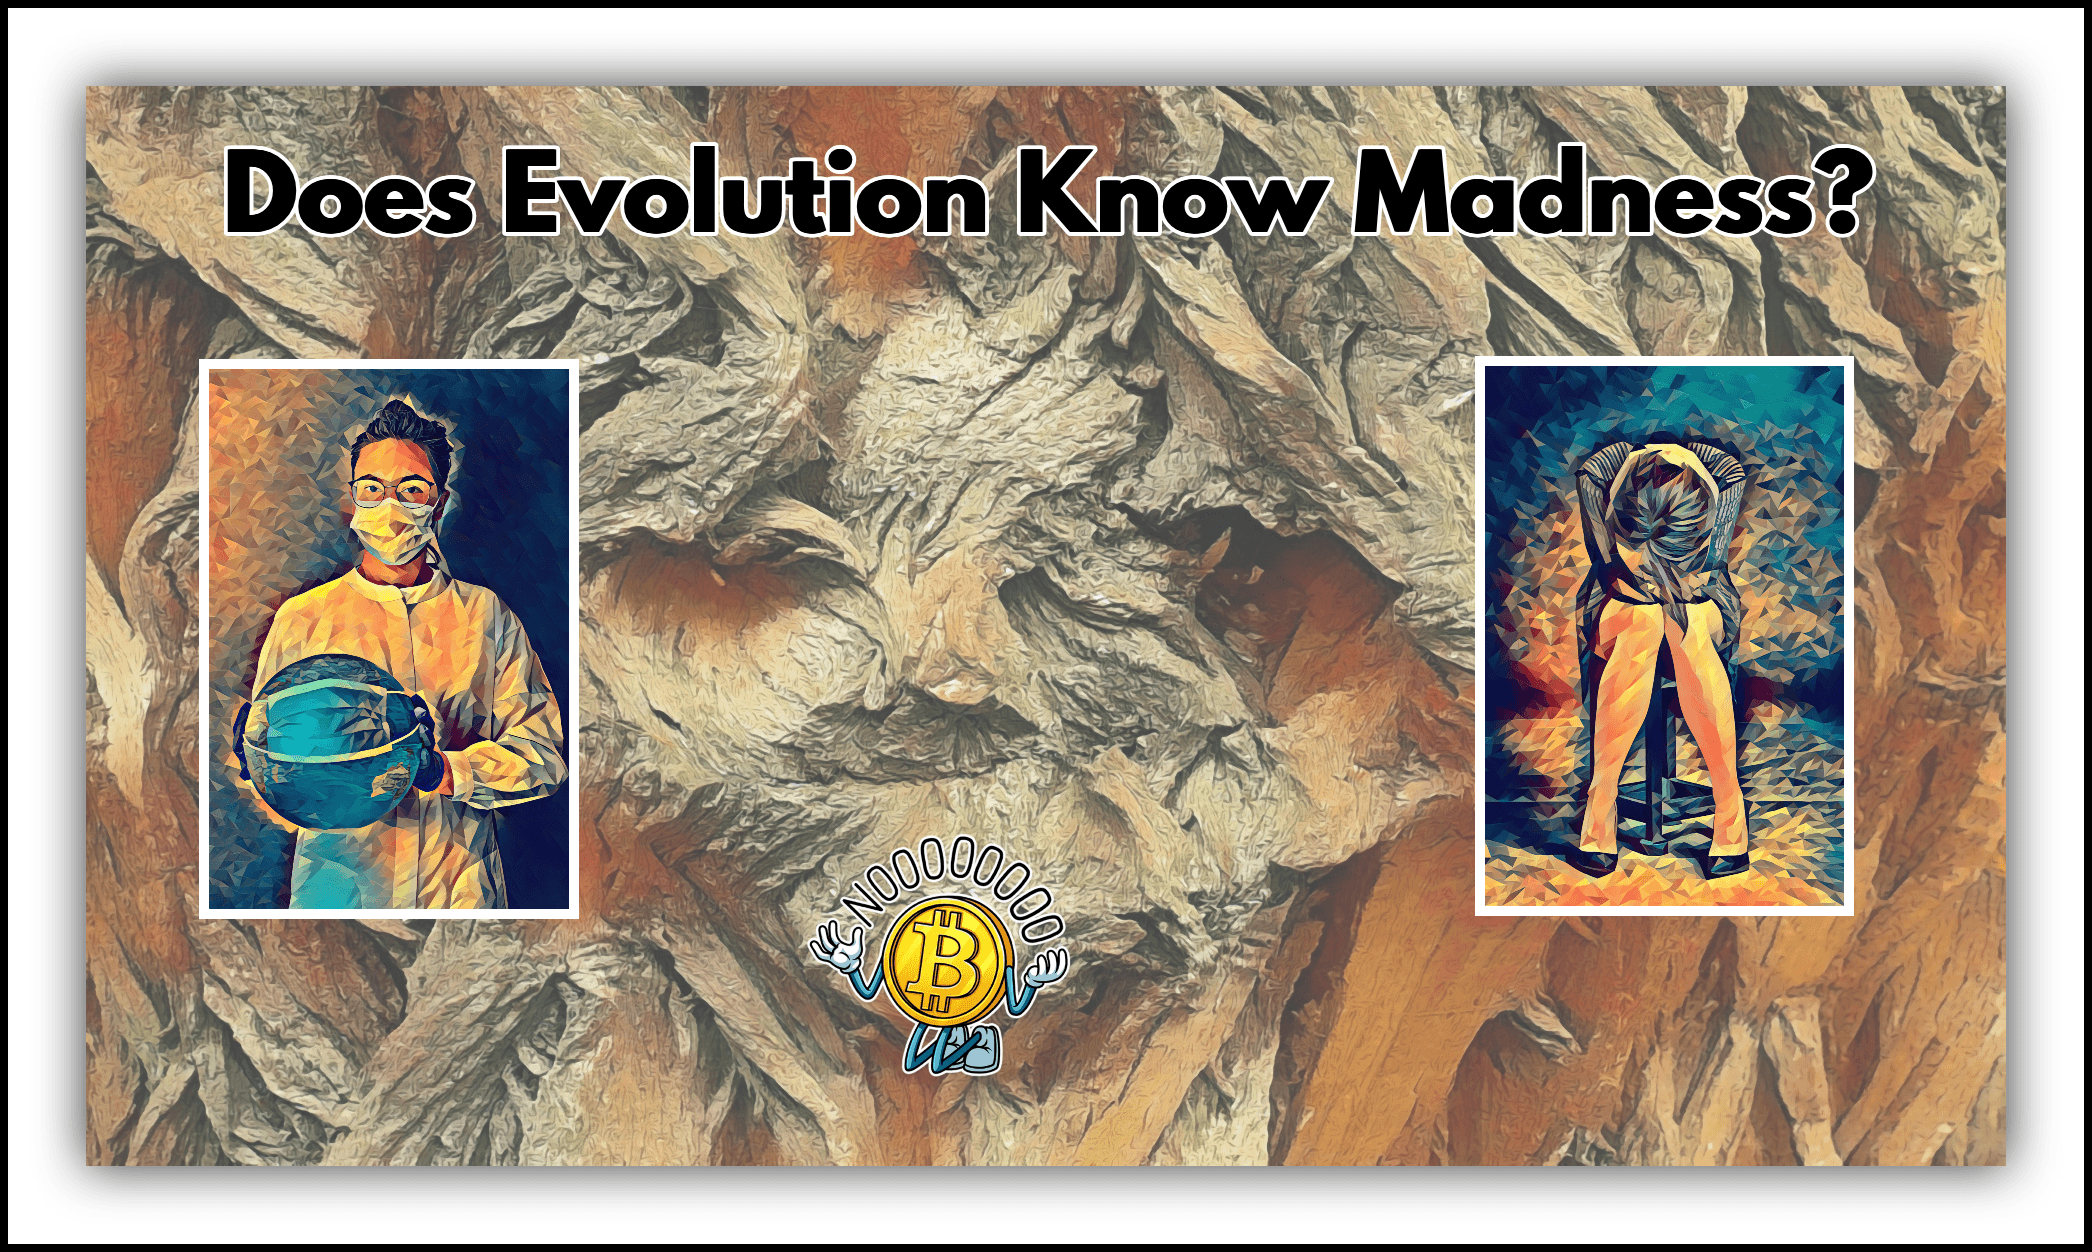 Does evolution know madness?